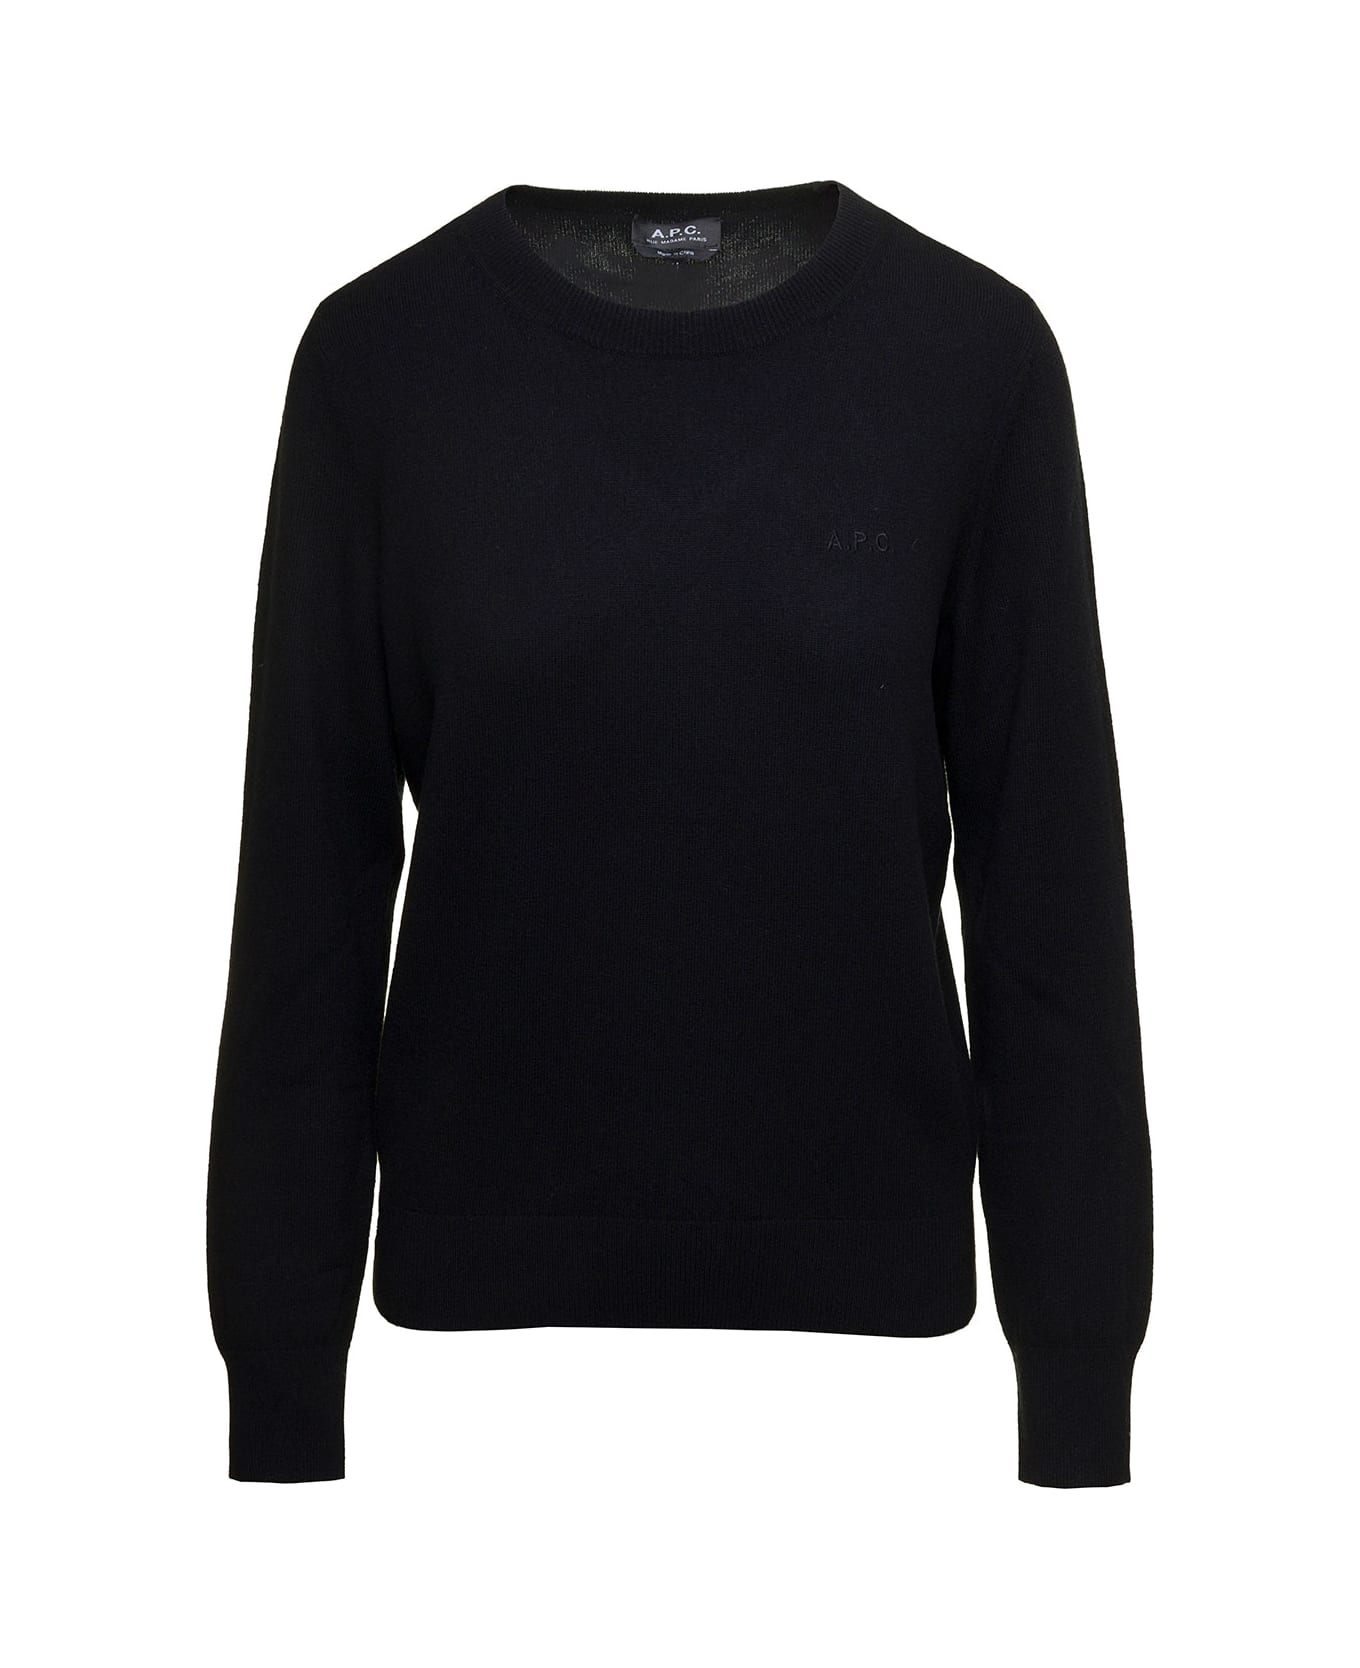 A.P.C. Sweater With Tonal Logo Embroidery - Black